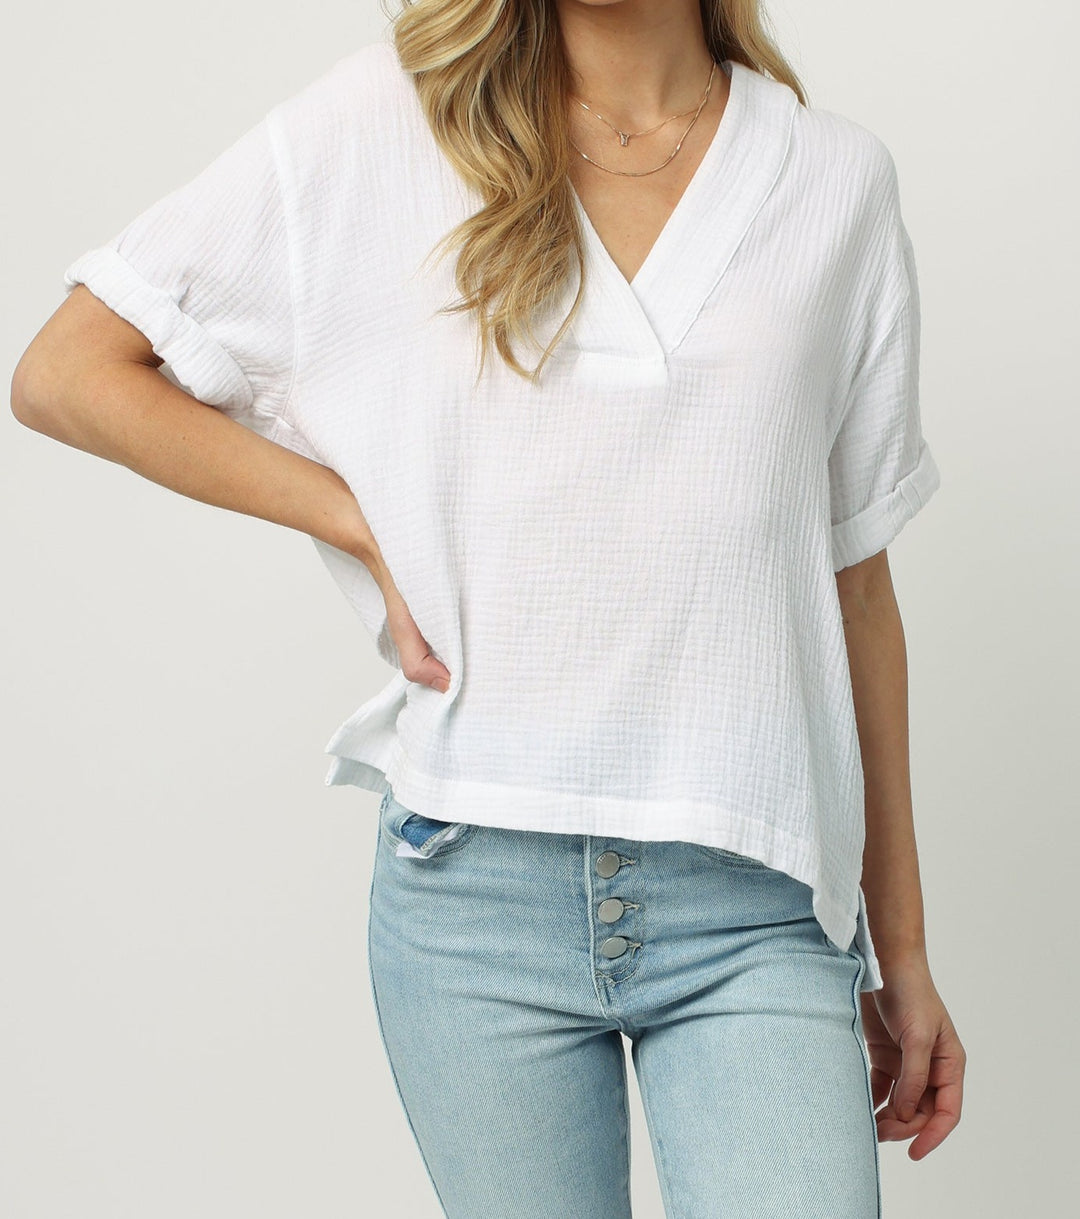 image of a female model wearing a JAILEE SHORT SLEEVE V NECK TOP WHITE WHITE TOPS